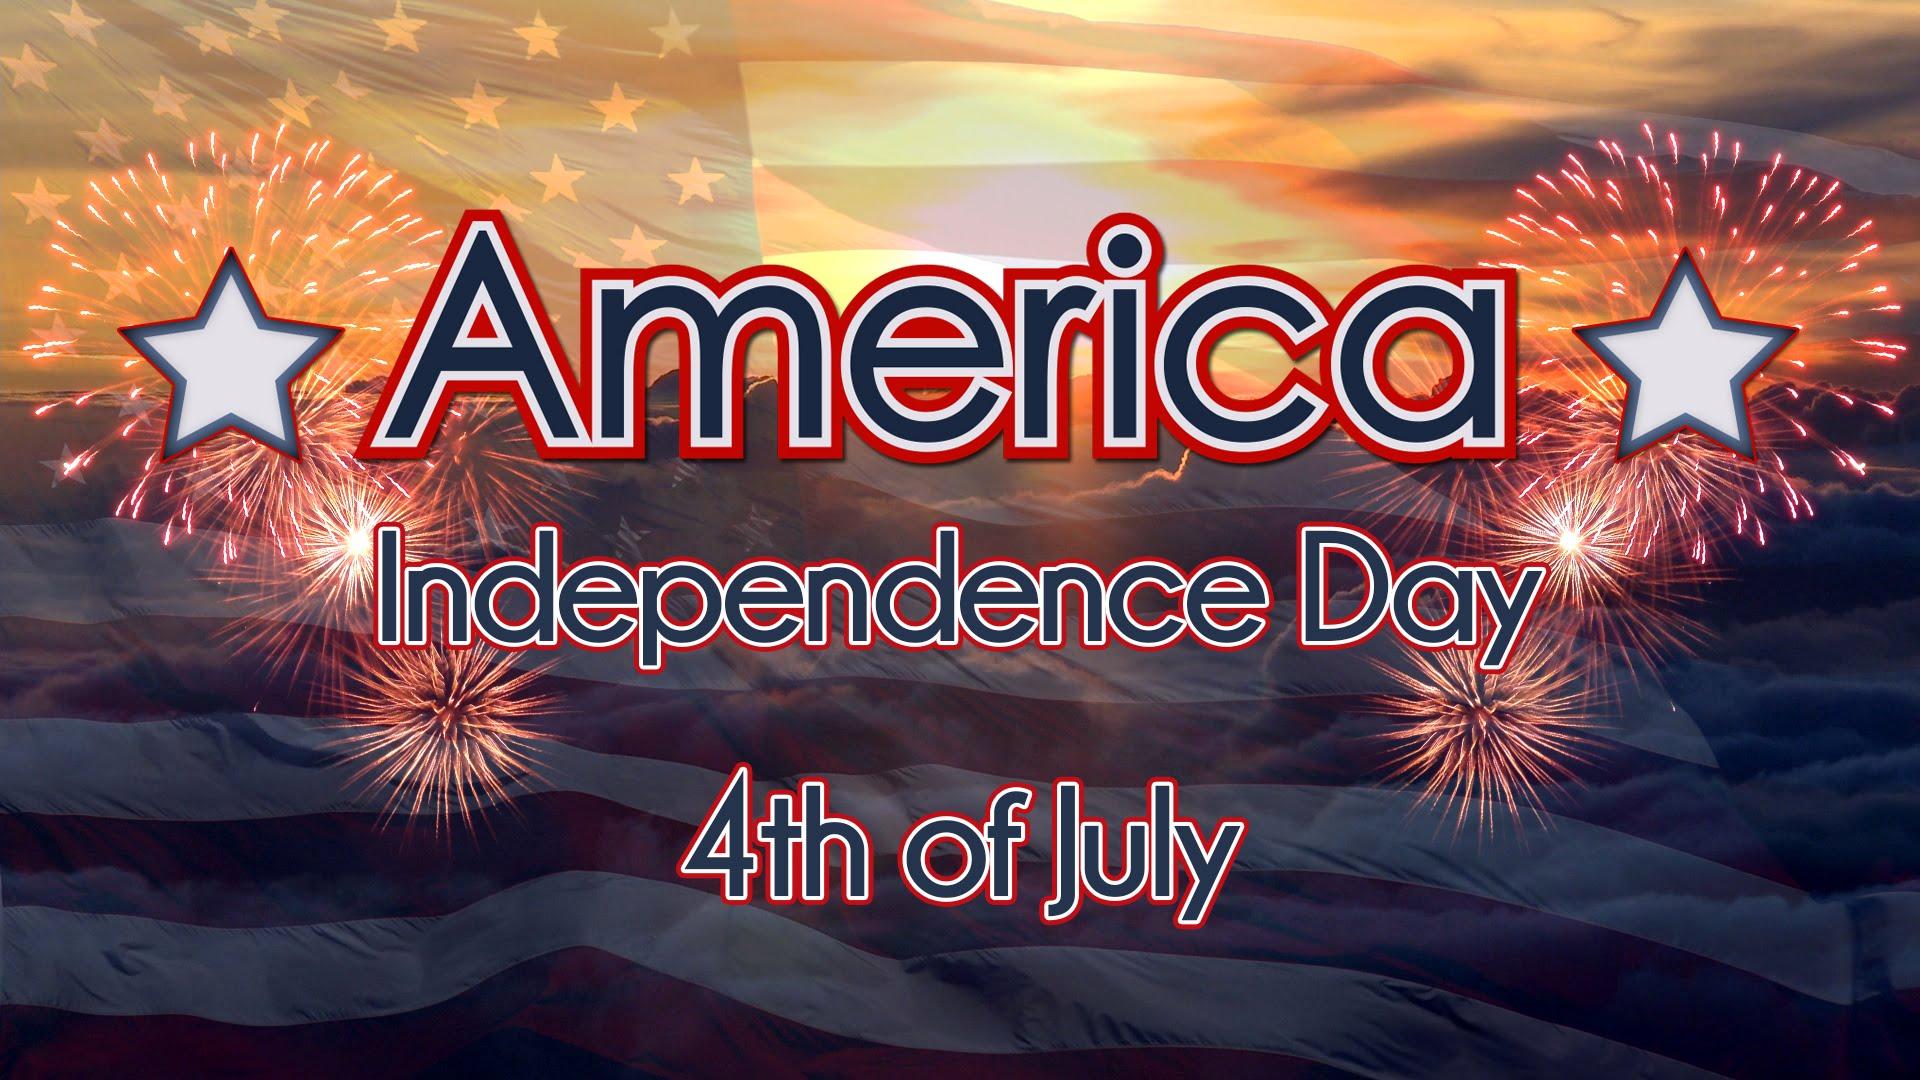 Happy Independence Day USA 4th July Image, Gifs, Picture, Quotes